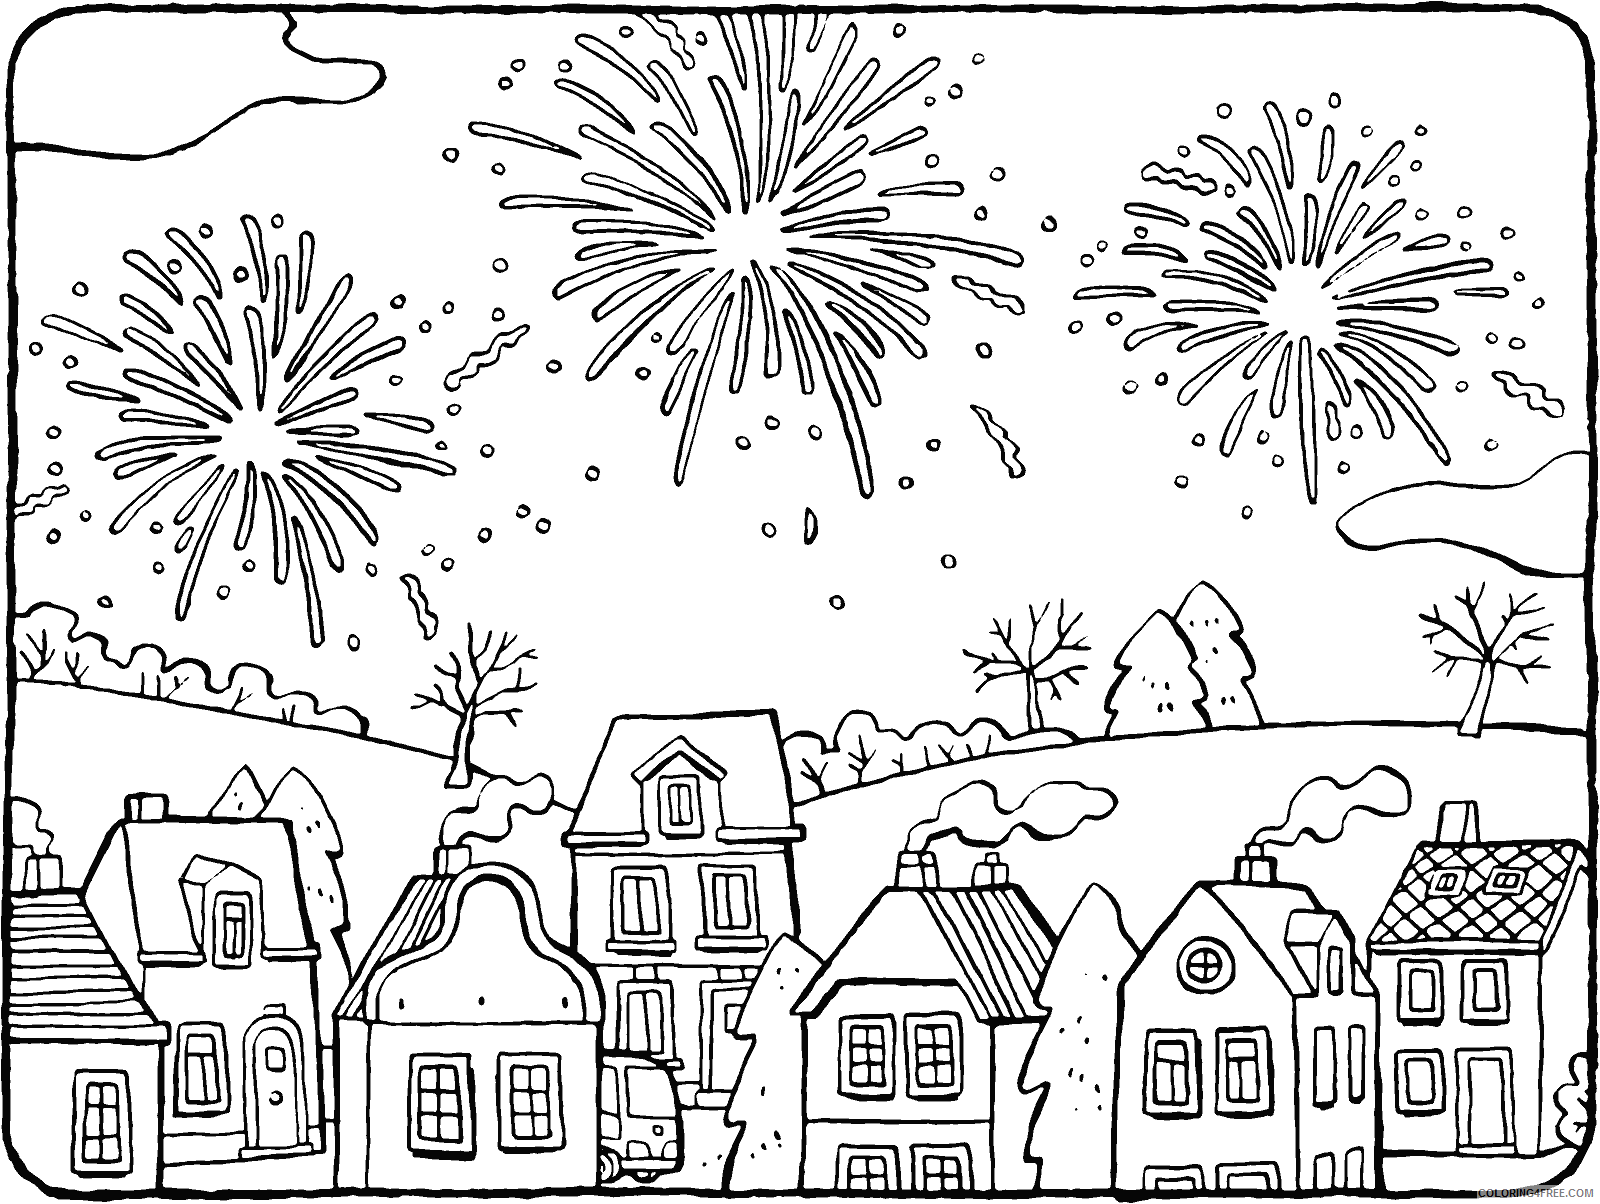 Fireworks Coloring Pages for boys Pretty Fireworks Sceneng Printable 2020 0352 Coloring4free